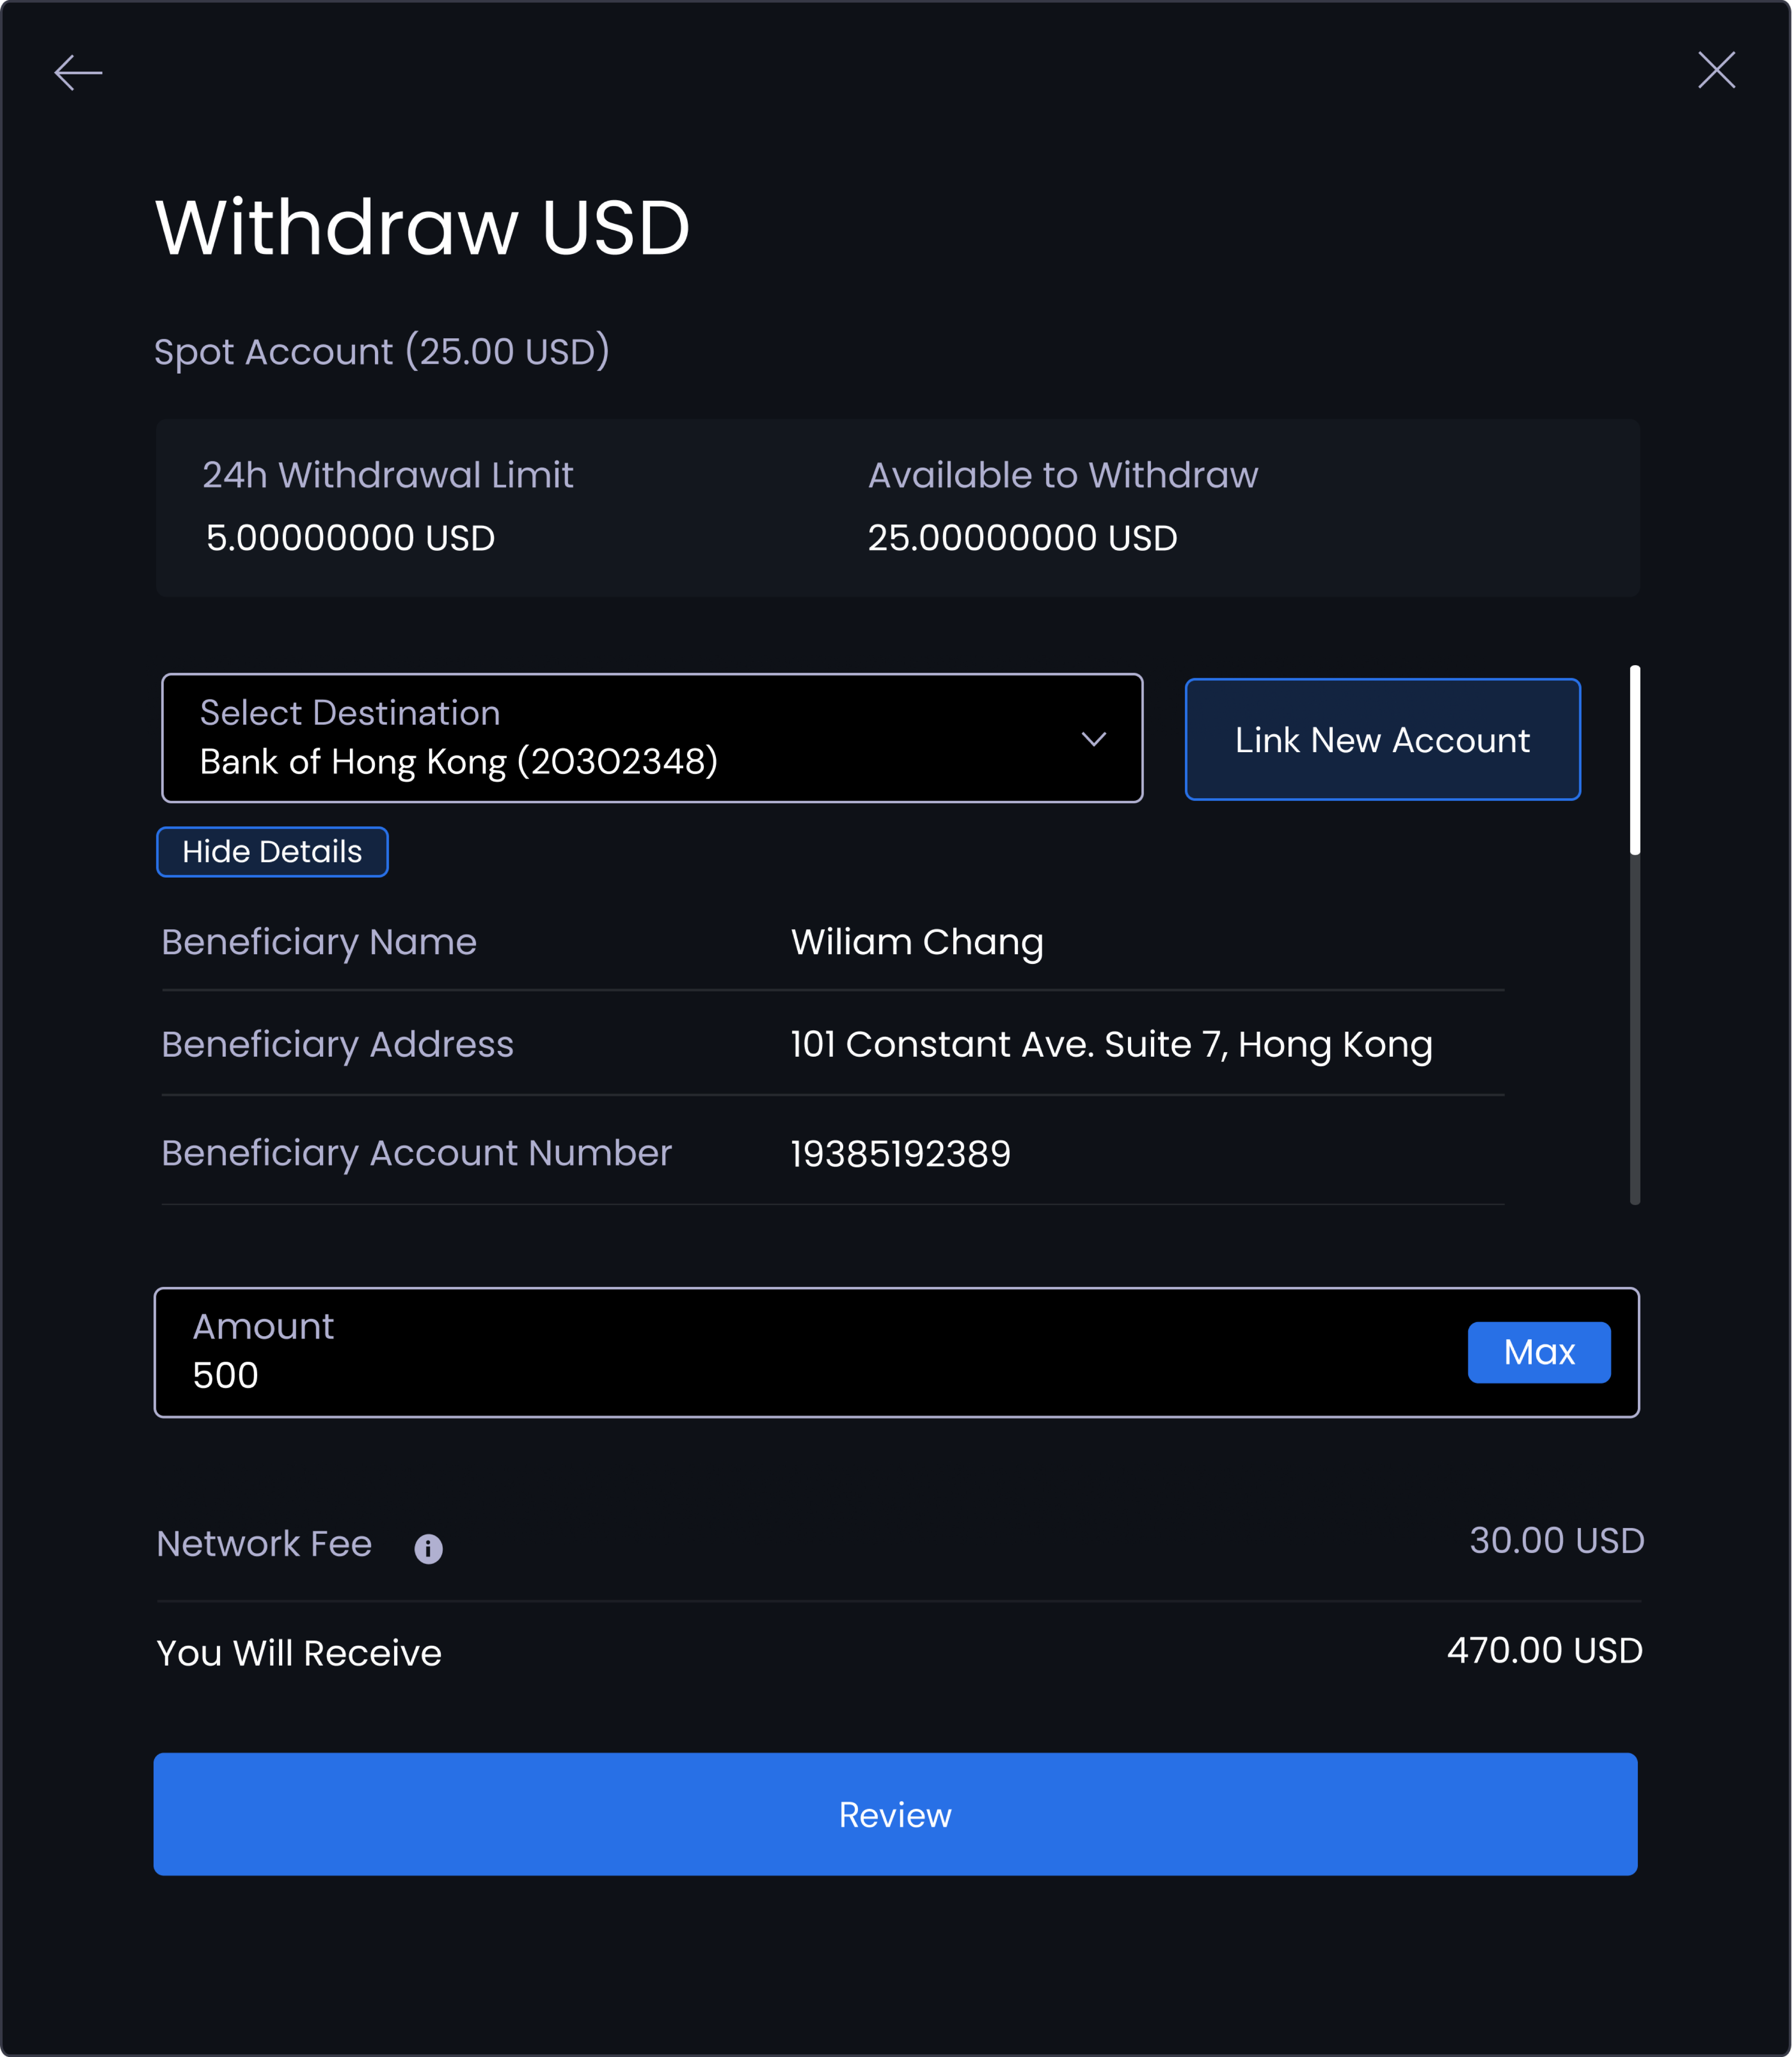 Withdraw fiat popup menu with information